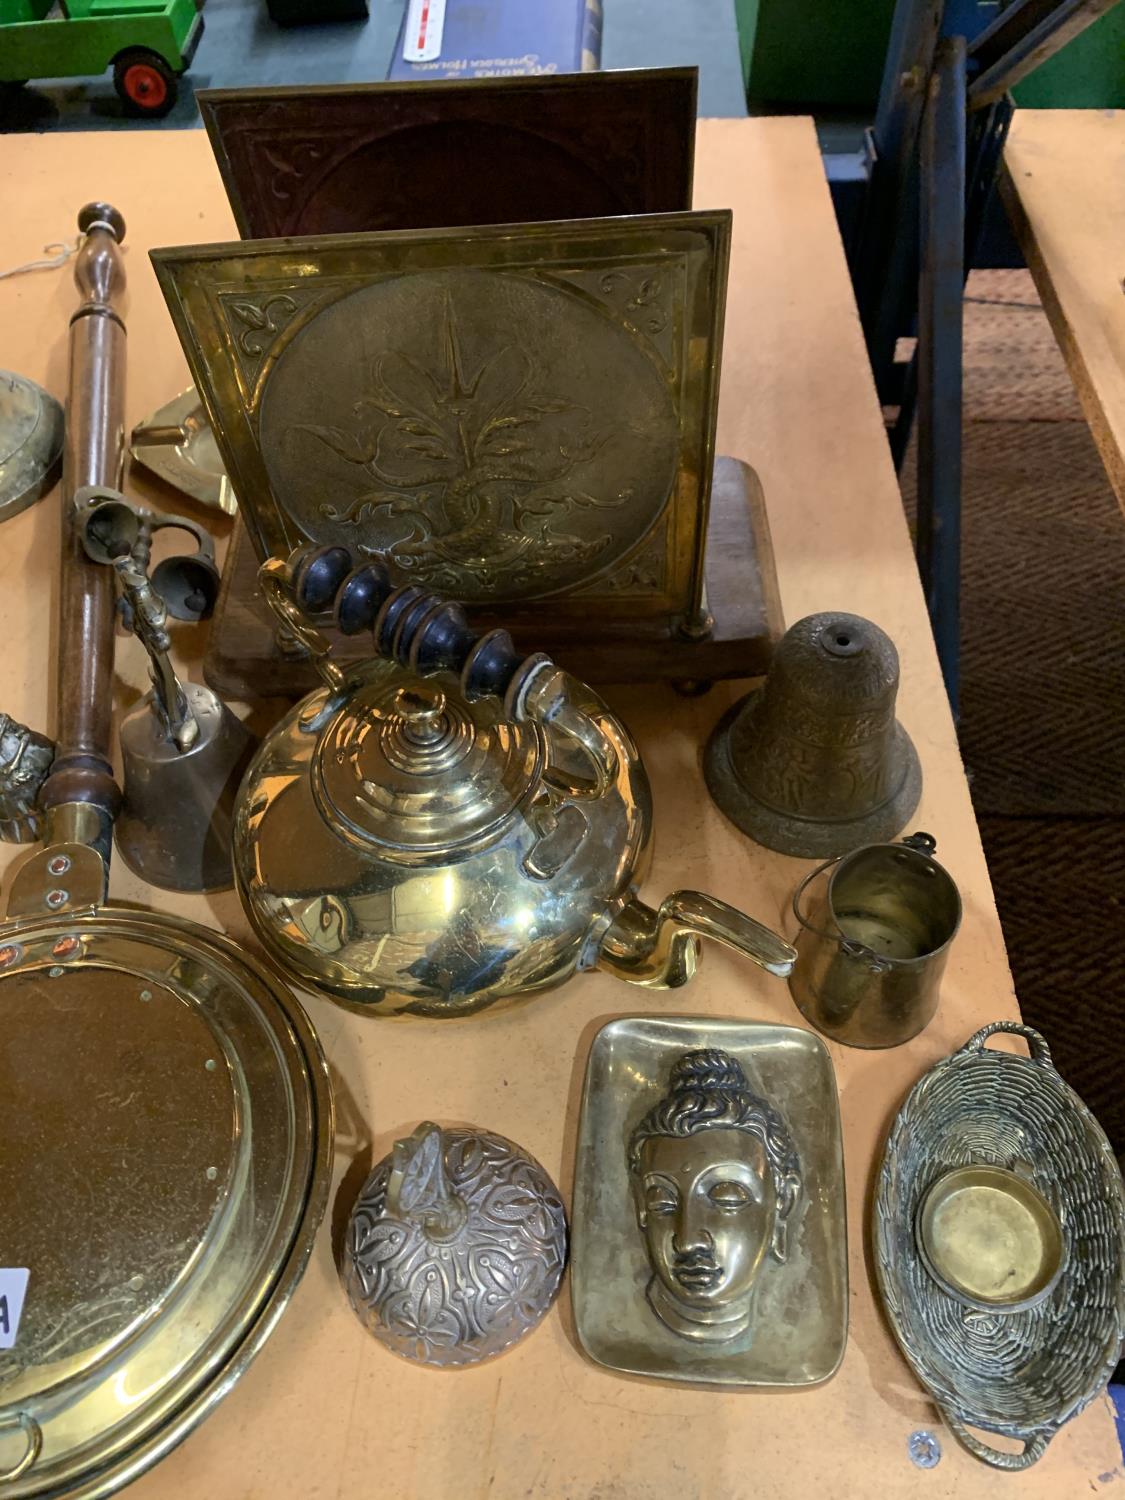 A LARGE QUANTITY OF BRASSWARE TO INCLUDE A BELL, HORSE BRASSES, KETTLE, CANDLESTICKS, CANNON, LAMP - Image 5 of 12